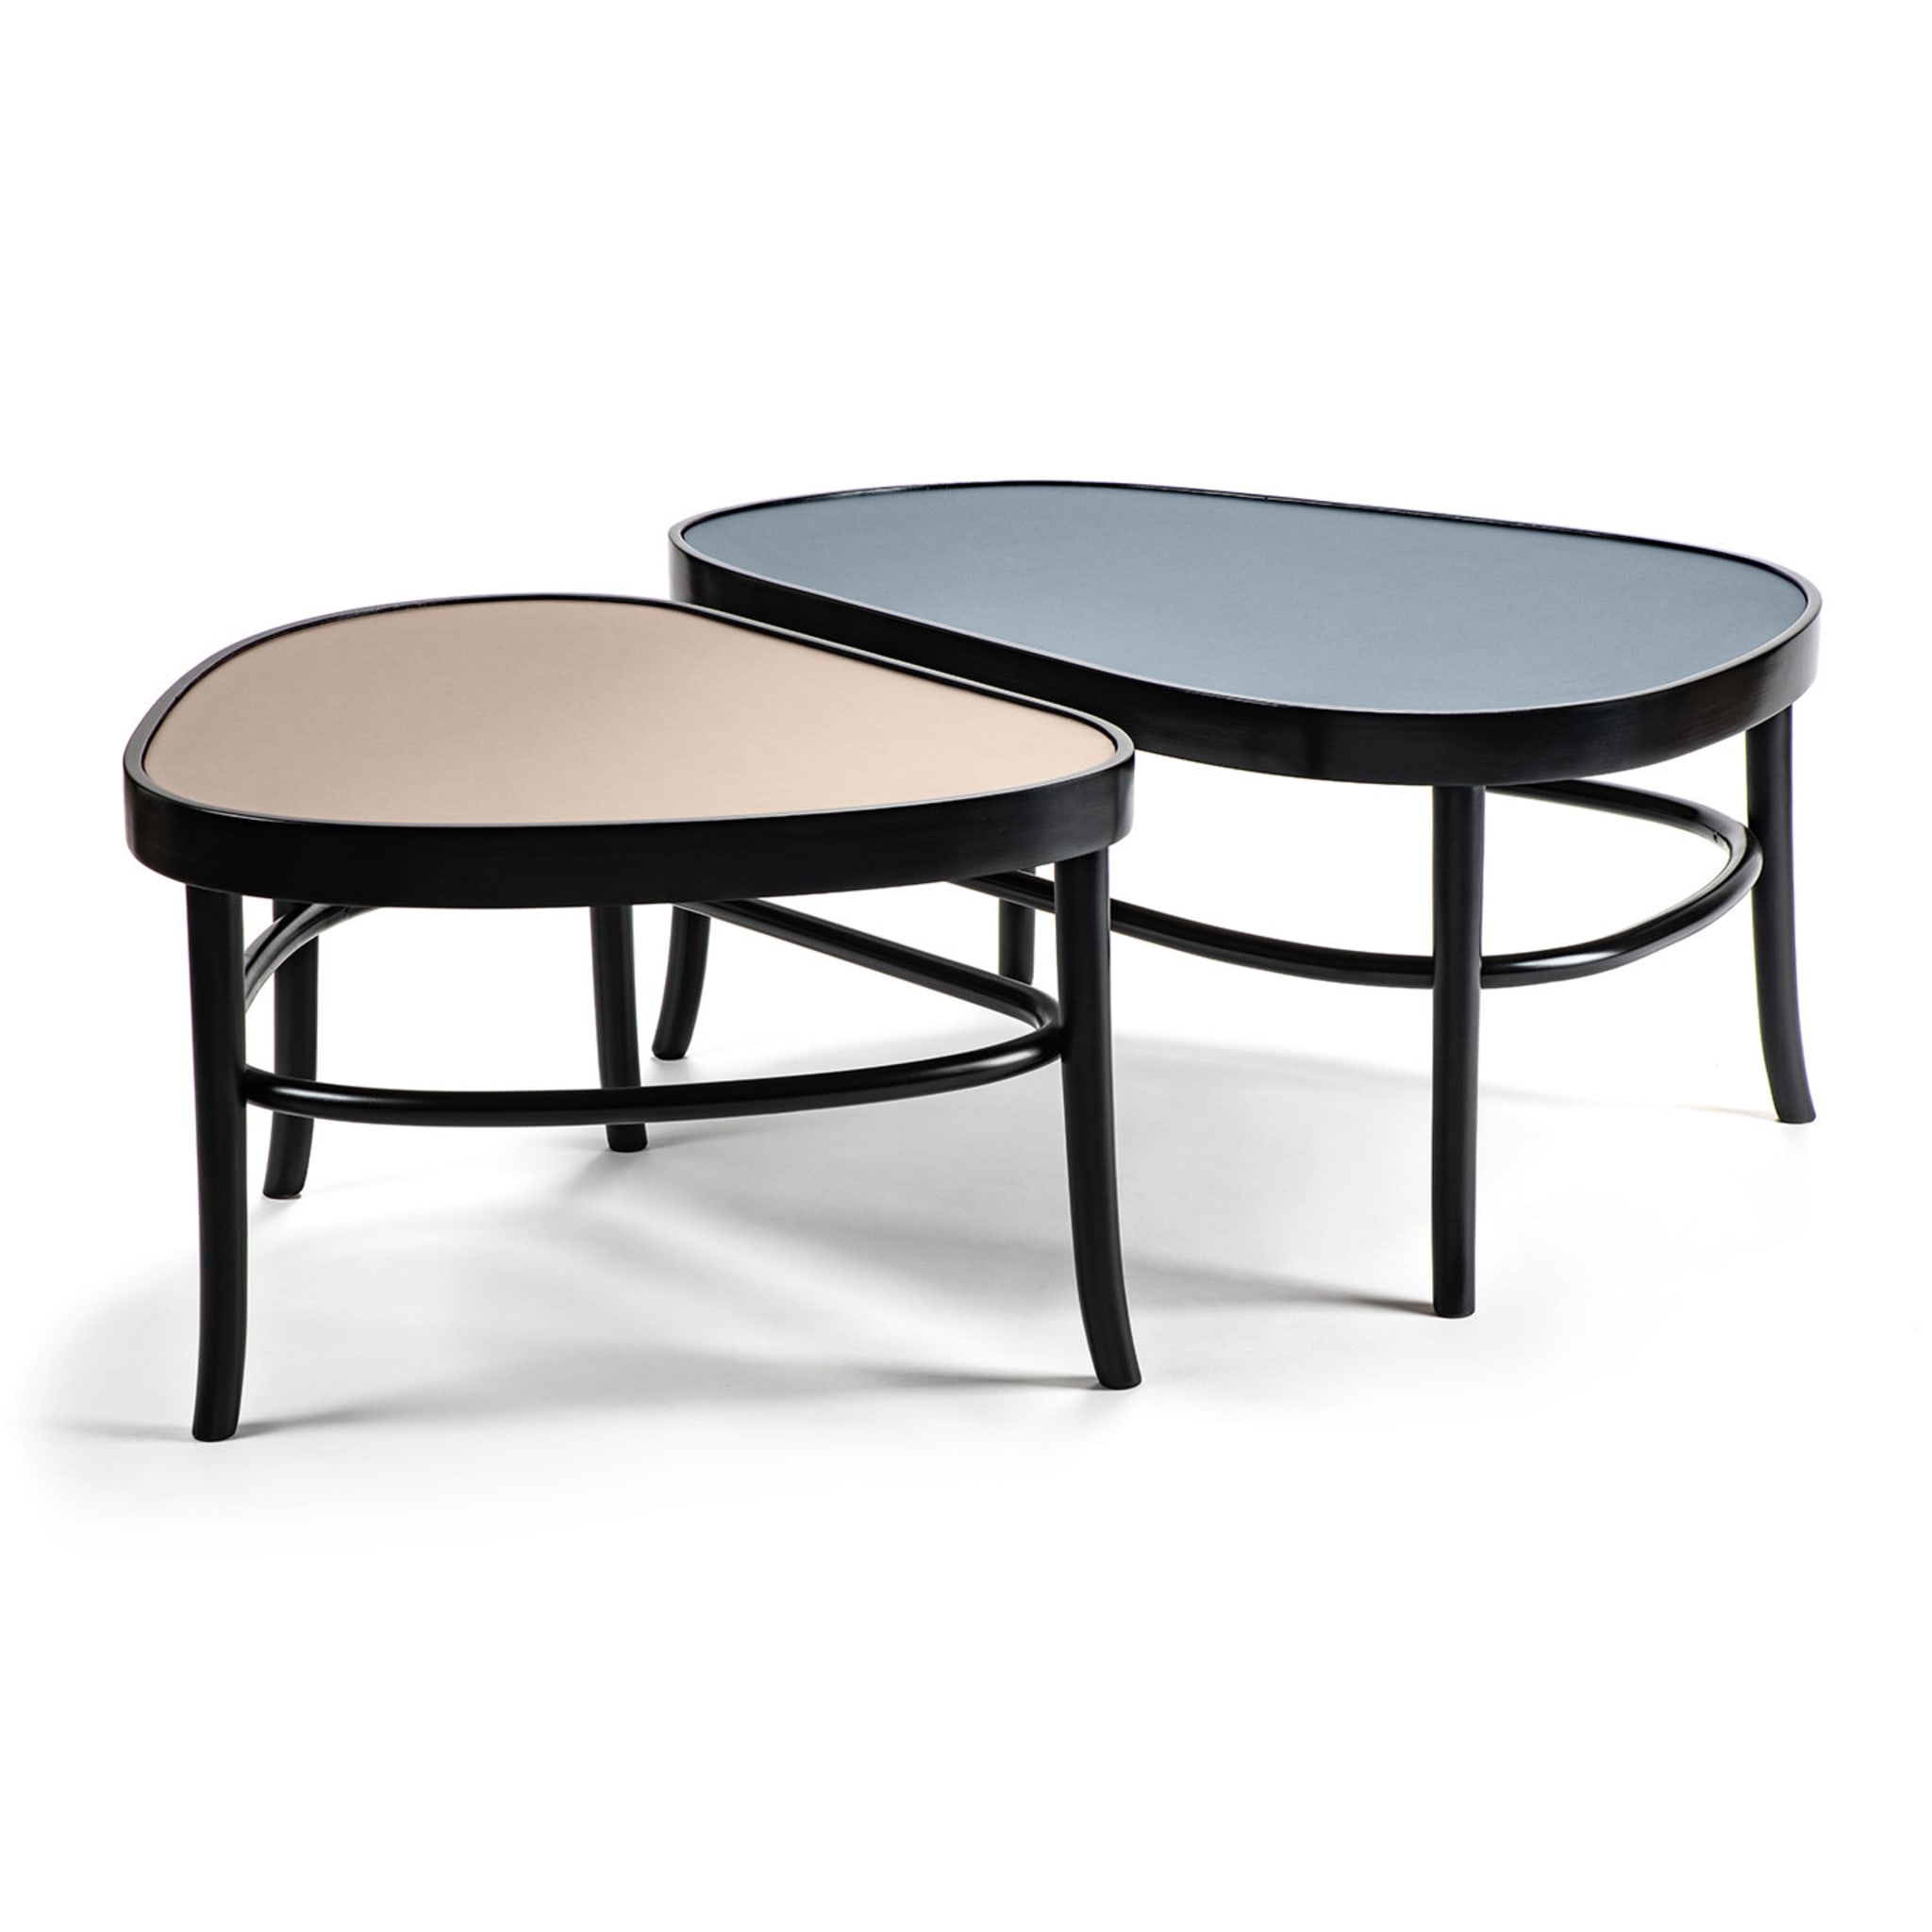 Large Peers Coffee Table by Front - Alternative view 3